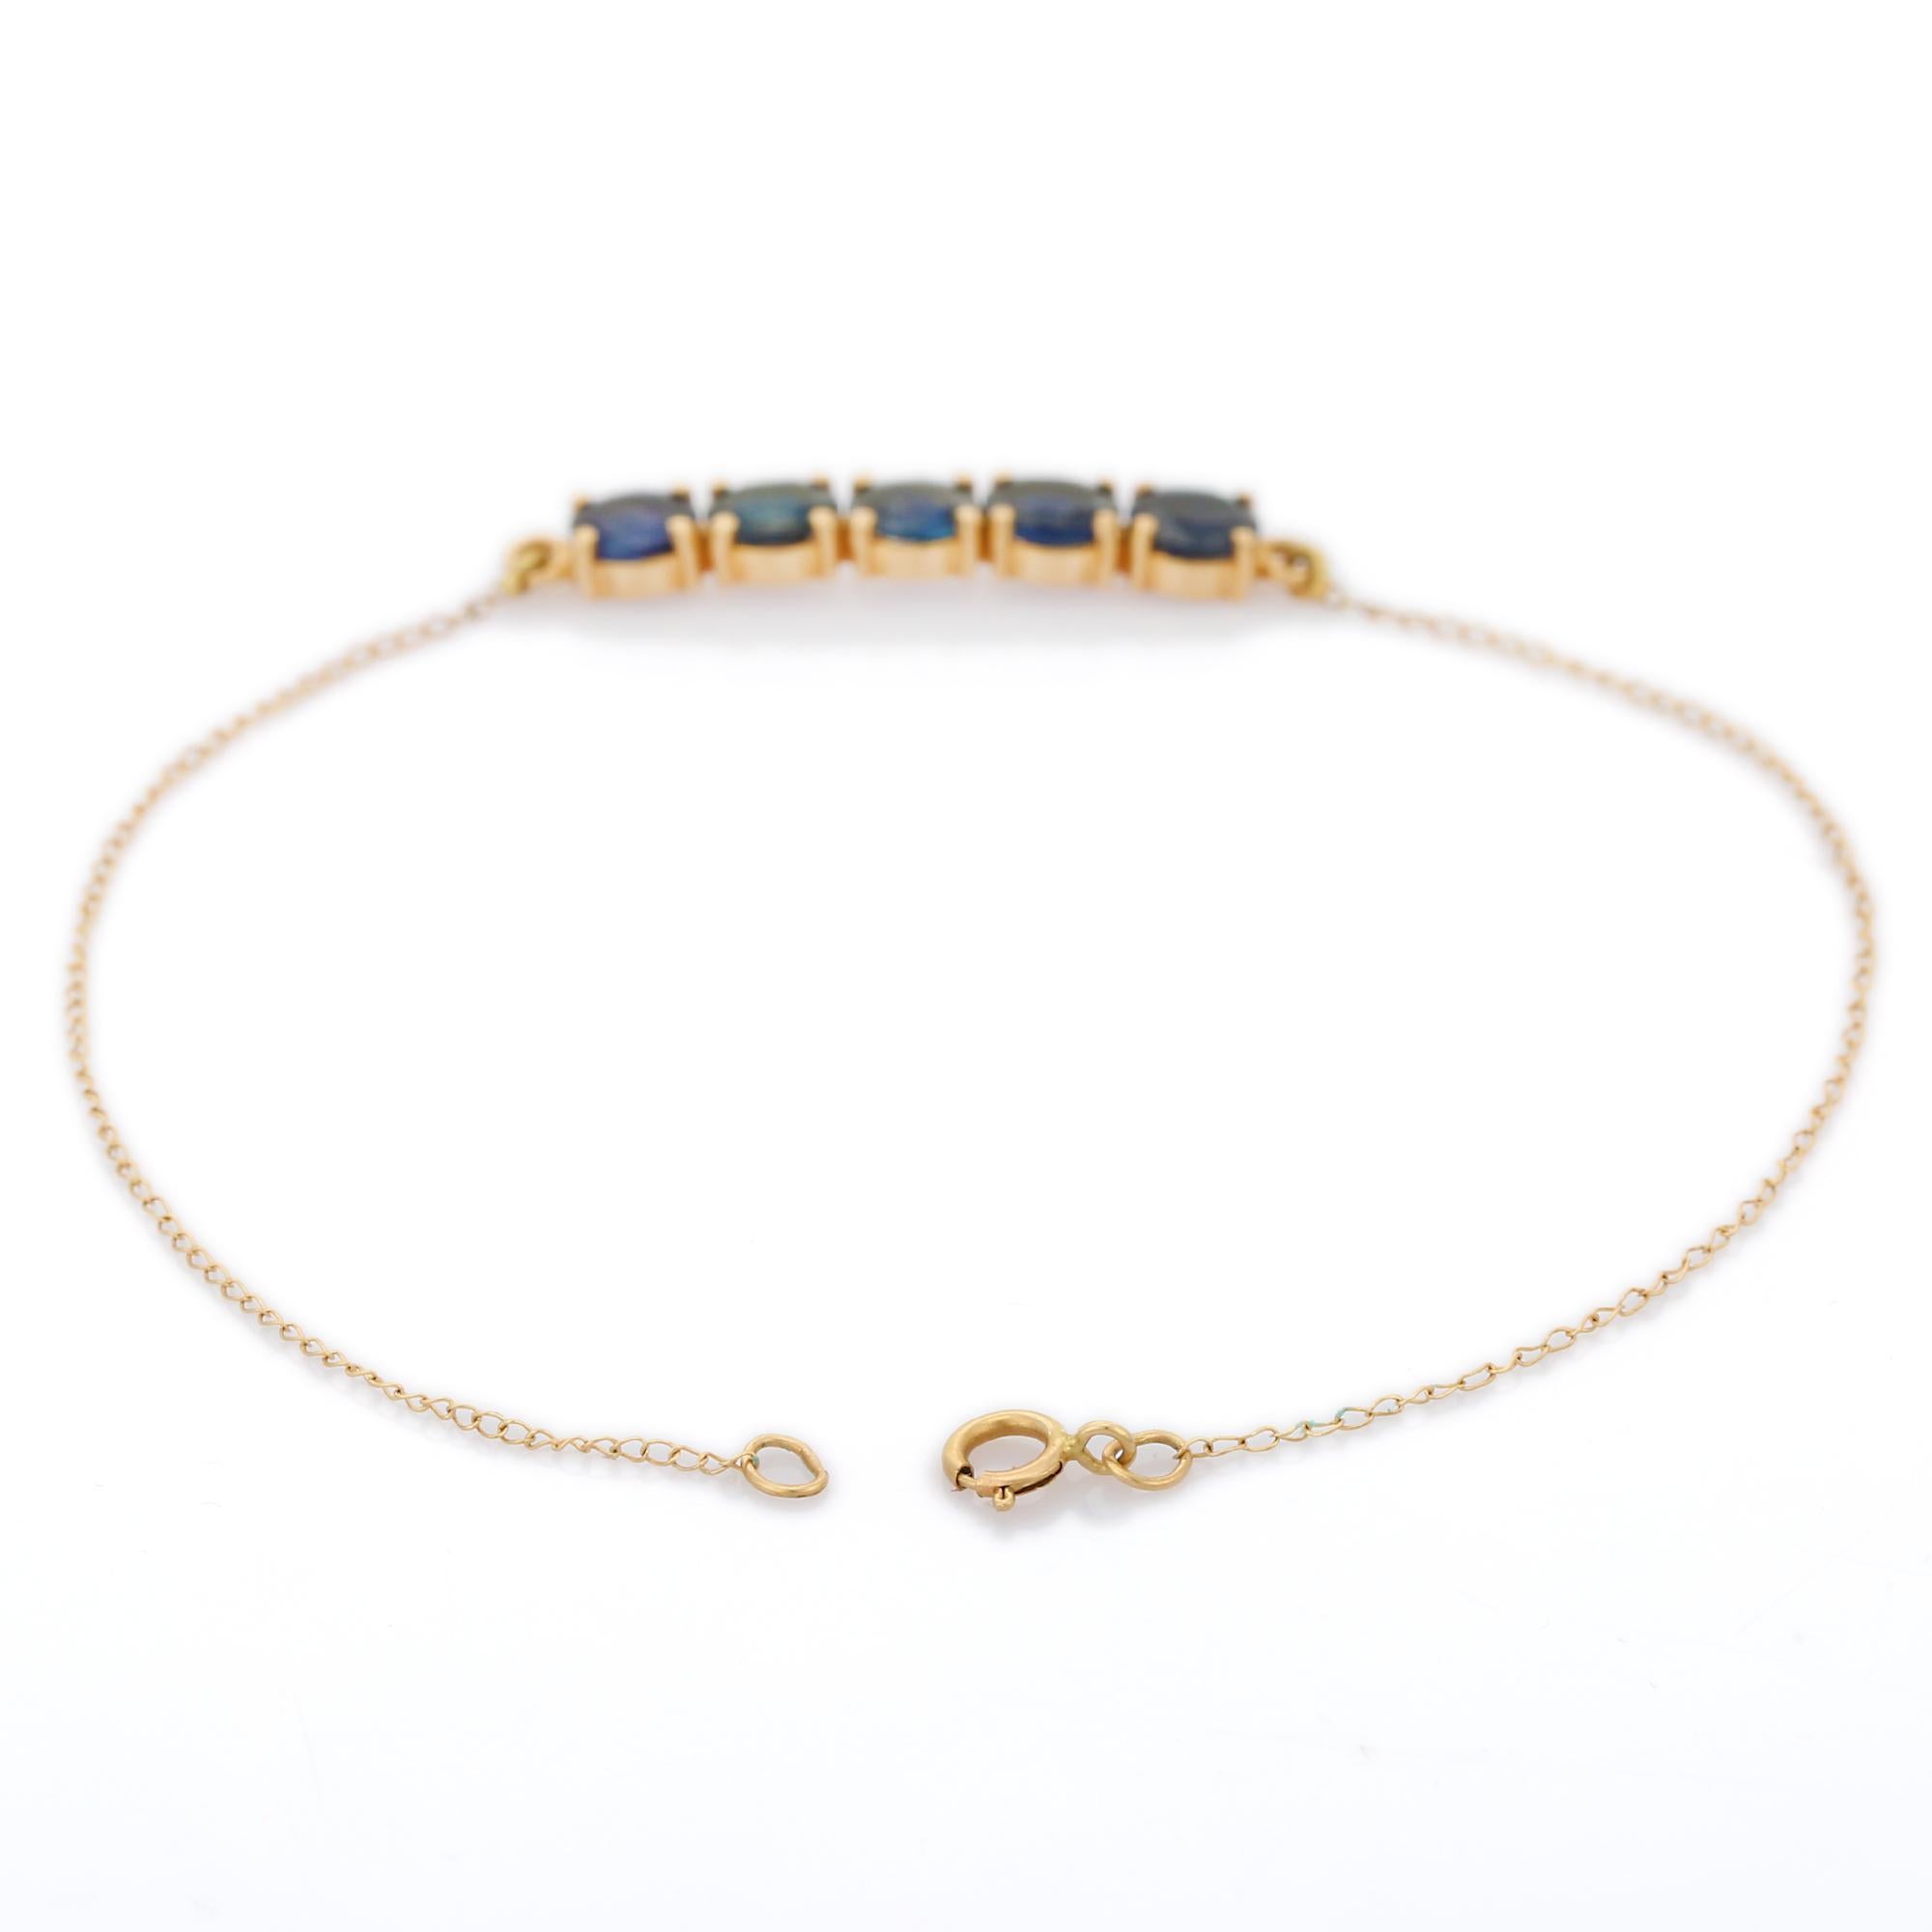 Women's Natural Blue Sapphire Chain Bracelet in 14K Yellow Gold